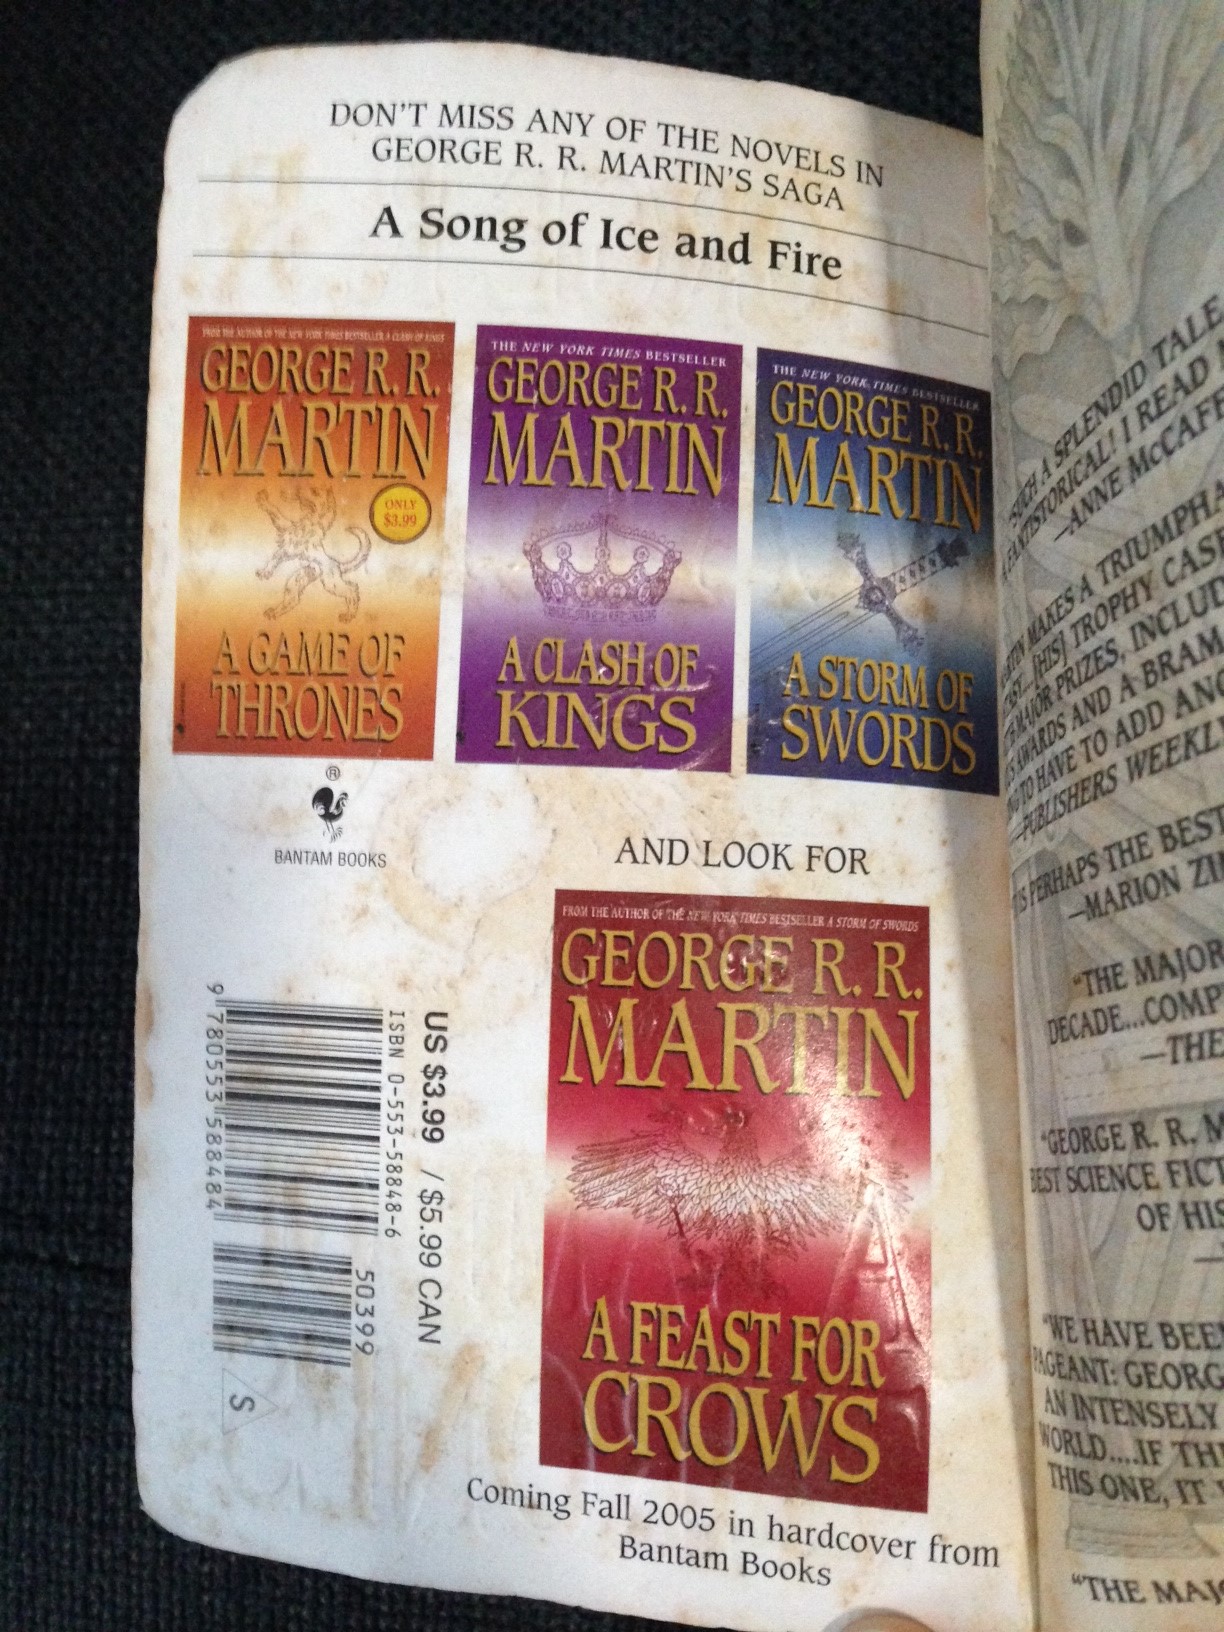 "A Game of Thrones" by George R R Martin